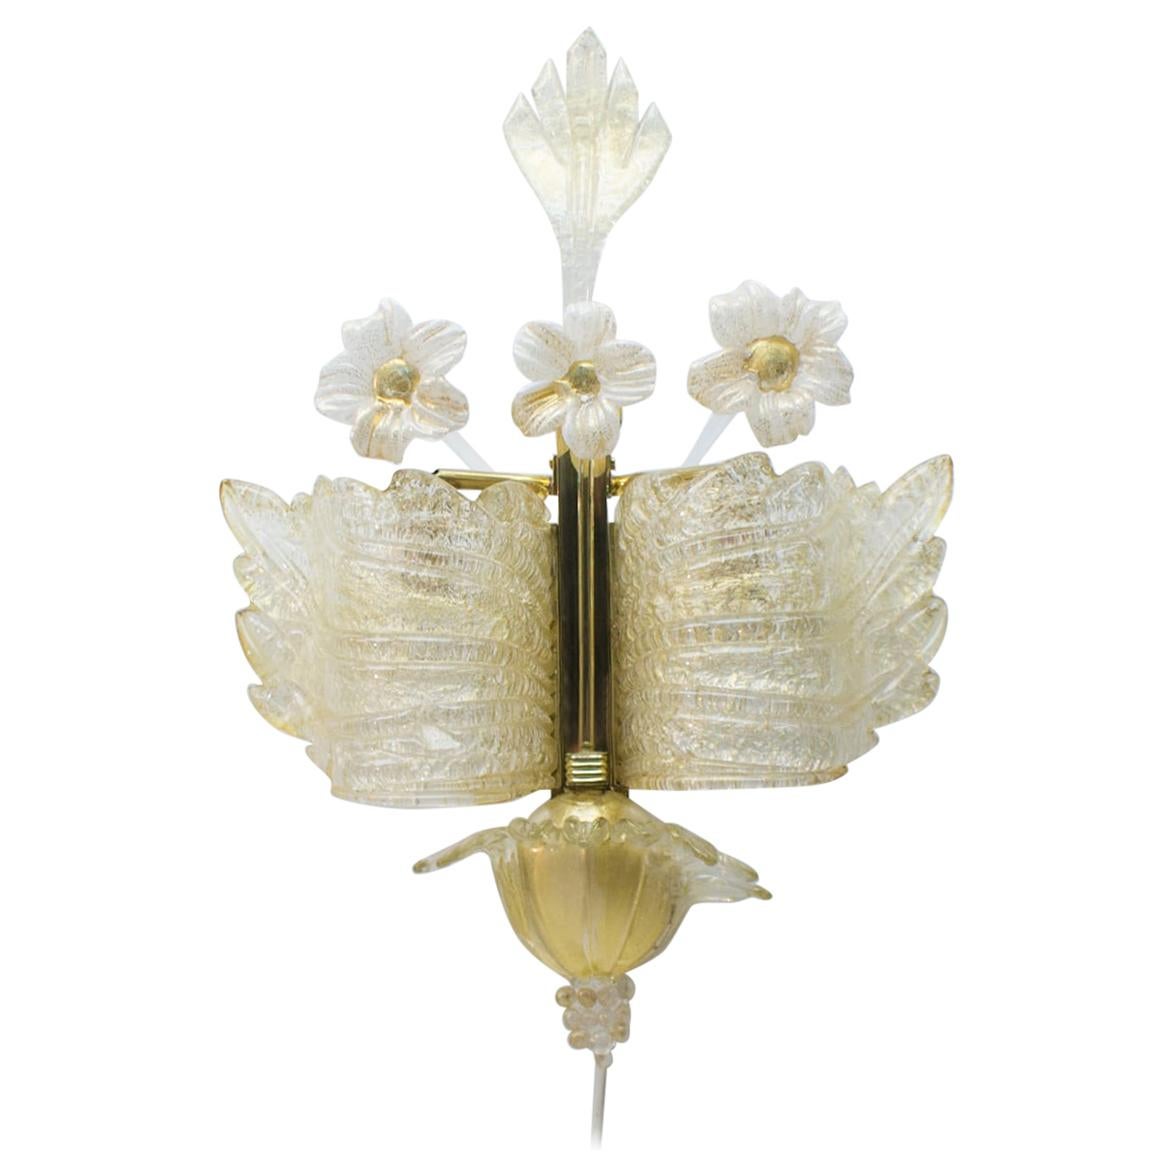 Rare and Wonderful Wall Light by Barovier & Toso, 1950s, Italy